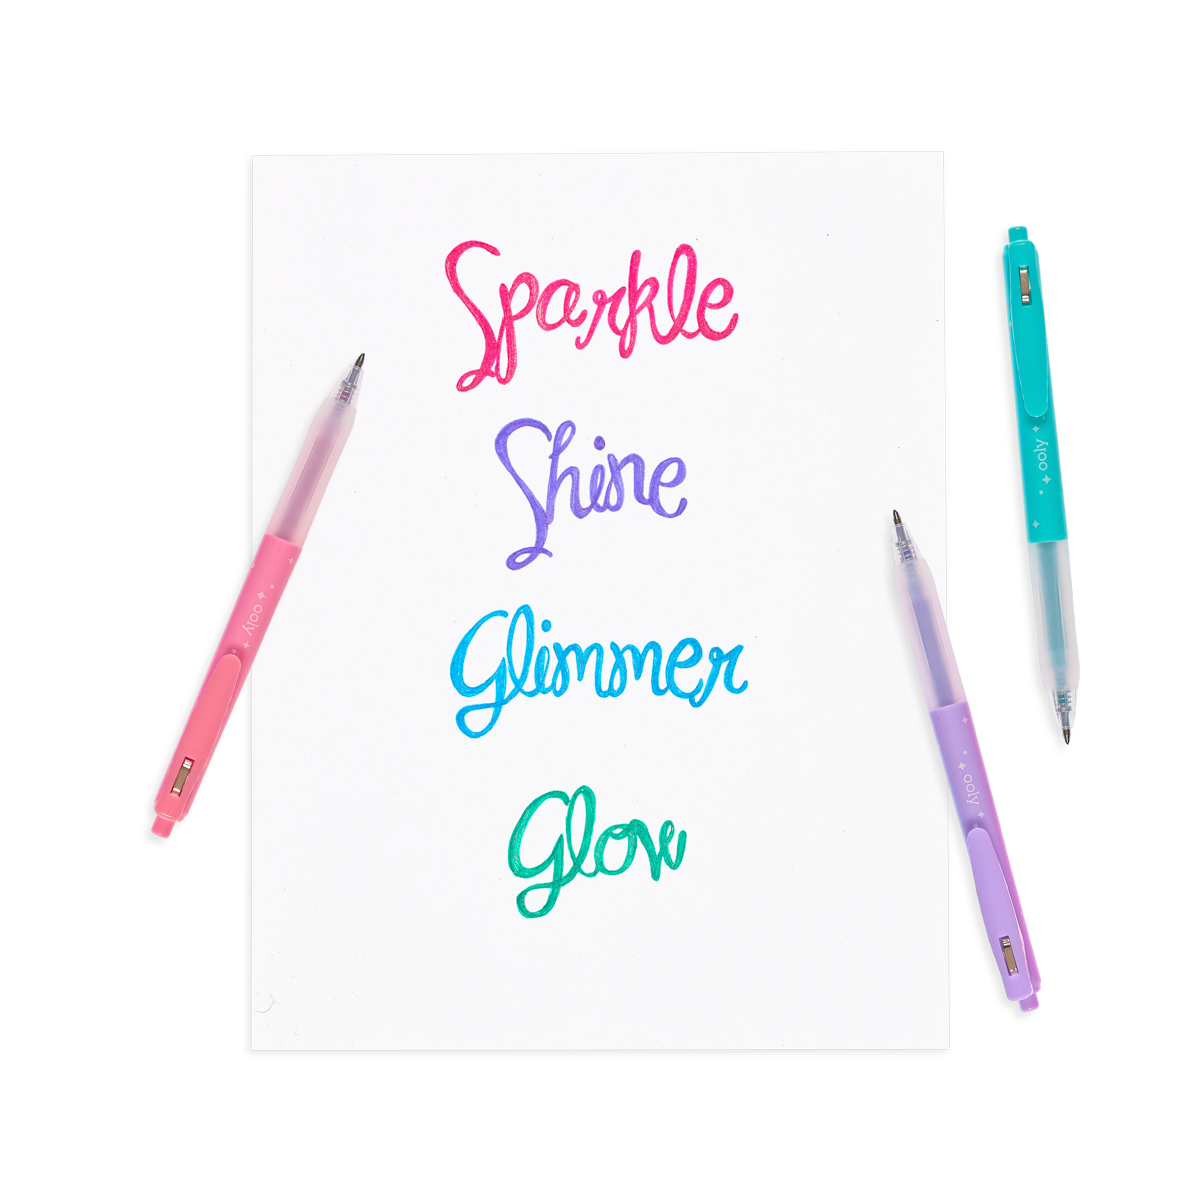 Oh My Glitter! Gel Pens - Set of 4 by OOLY